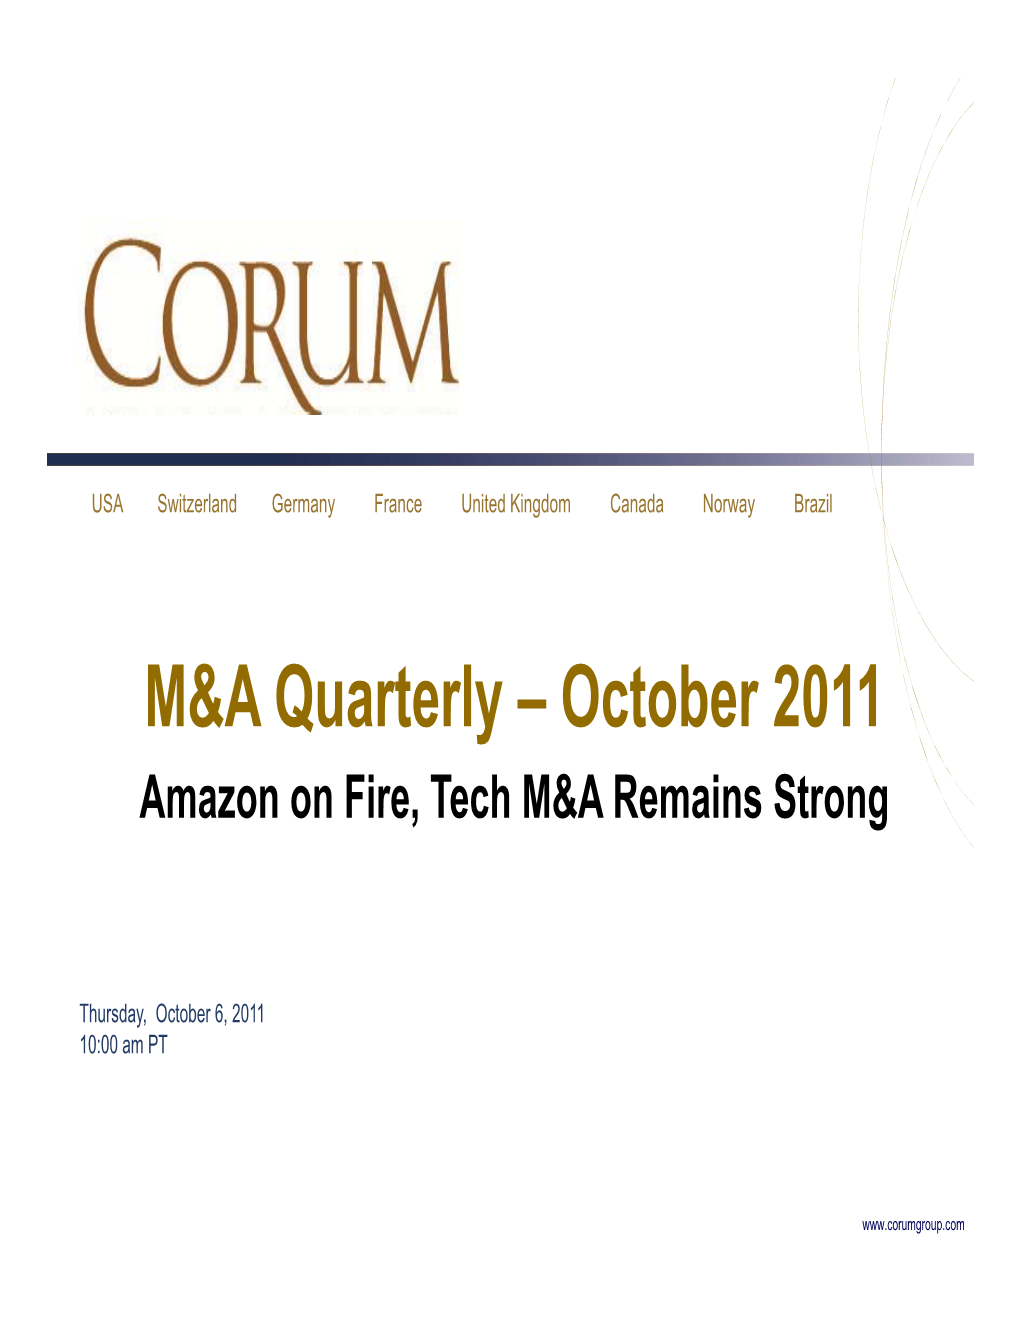 October 2011 Amazon on Fire, Tech M&A Remains Strong